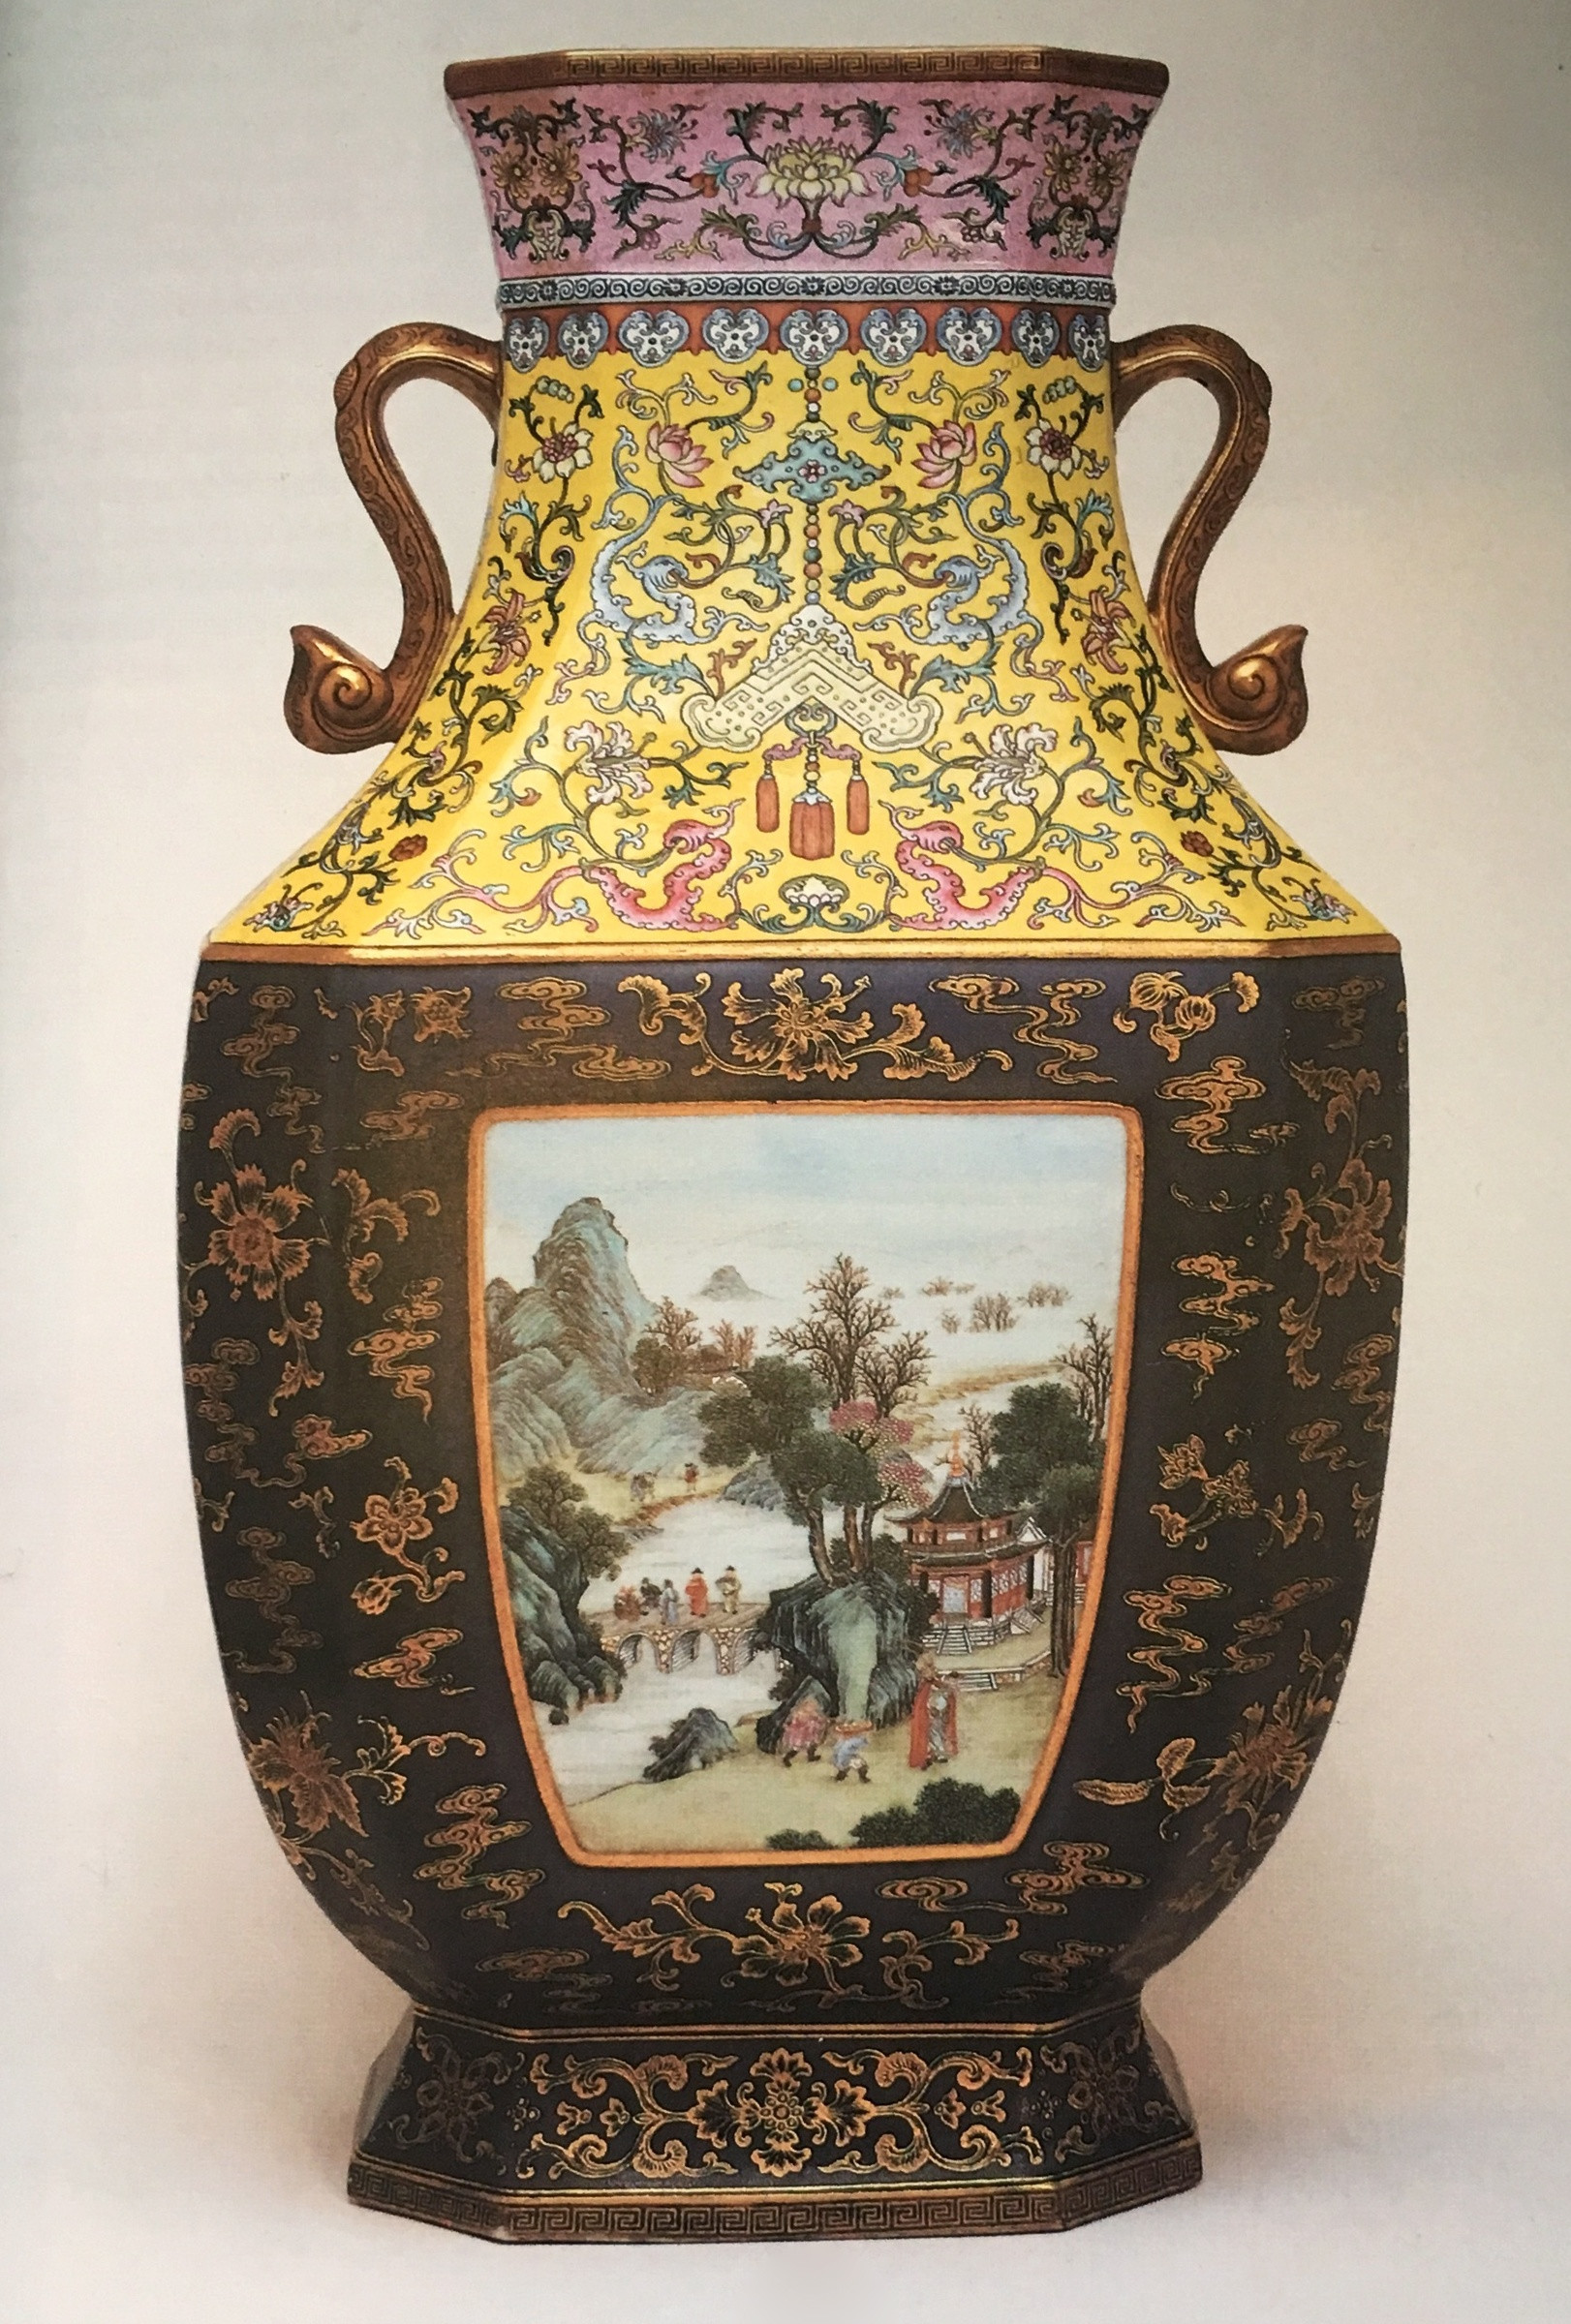 20 Stylish Glazed Pottery Vases 2024 free download glazed pottery vases of an extremely fine facetted famille rose vase qianlong 1736 1795 with an extremely fine facetted famille rose vase